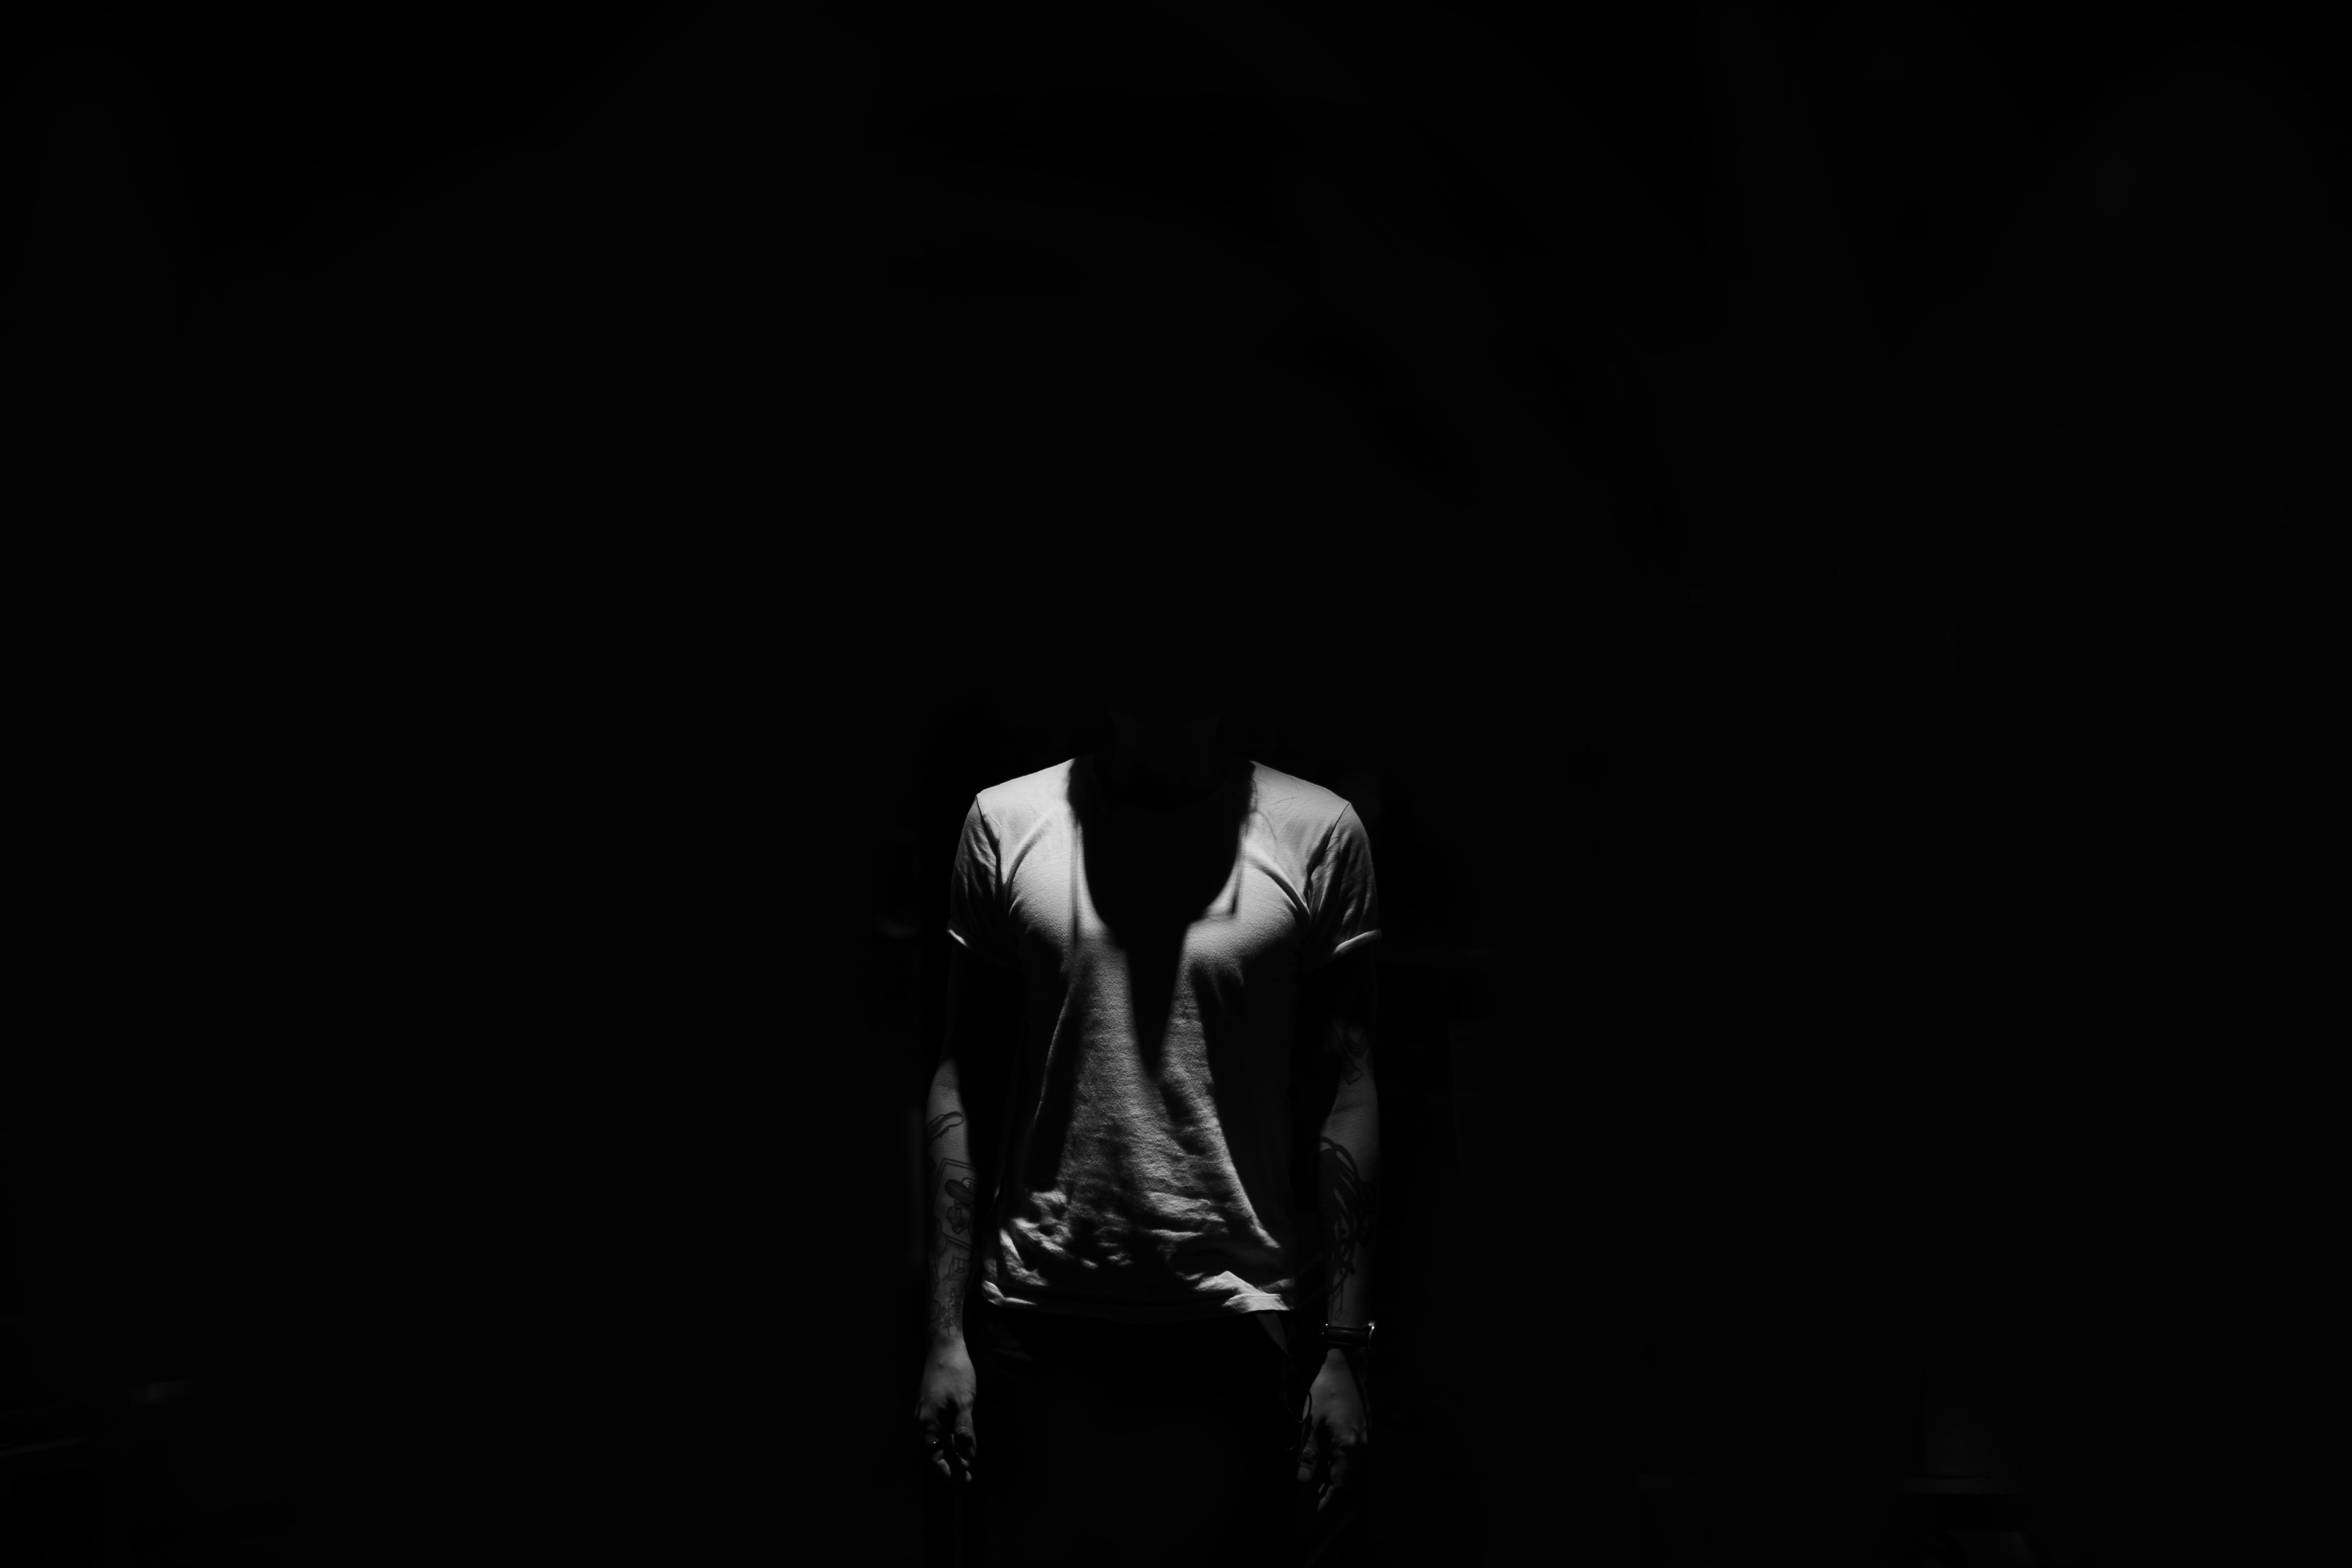 shadow, chb, dark, black, darkness, silhouette, bw for android